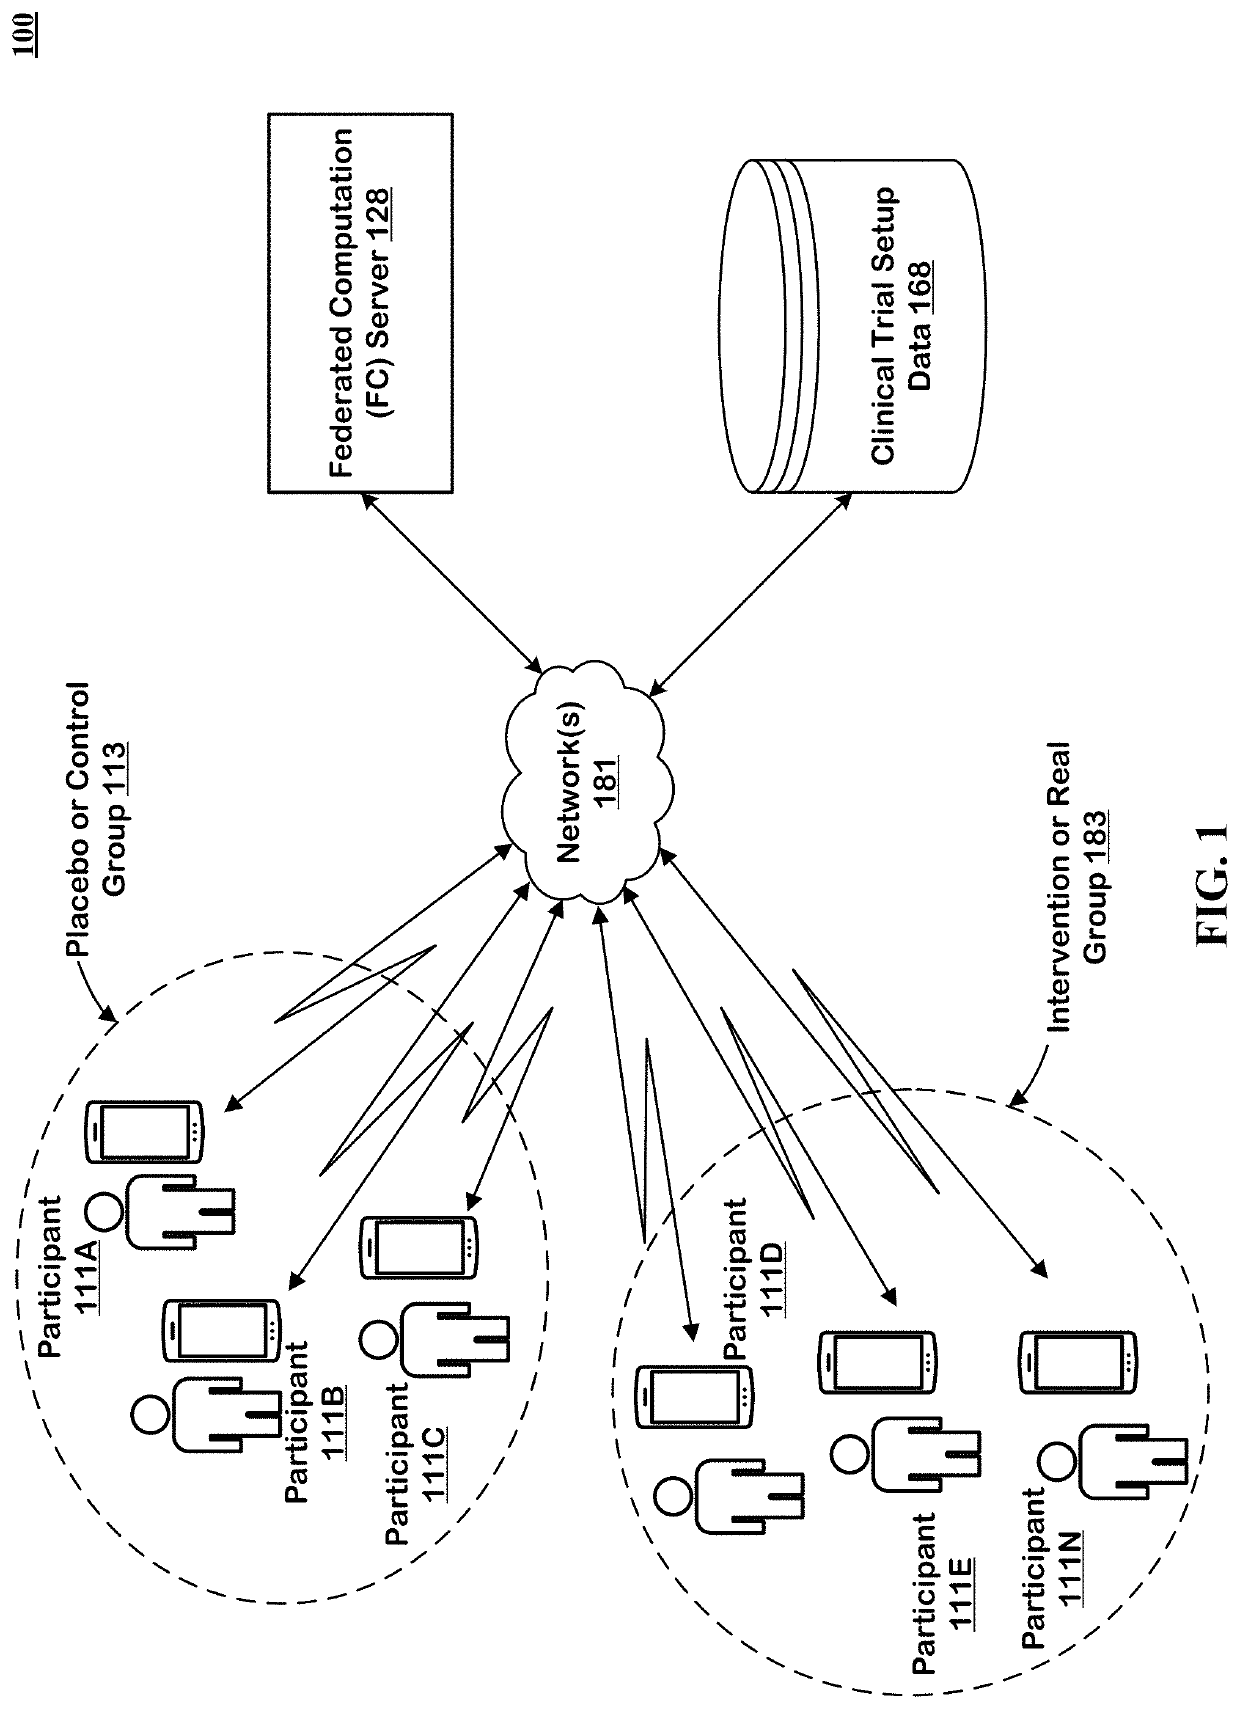 Systems and Methods for Virtual Clinical Trials